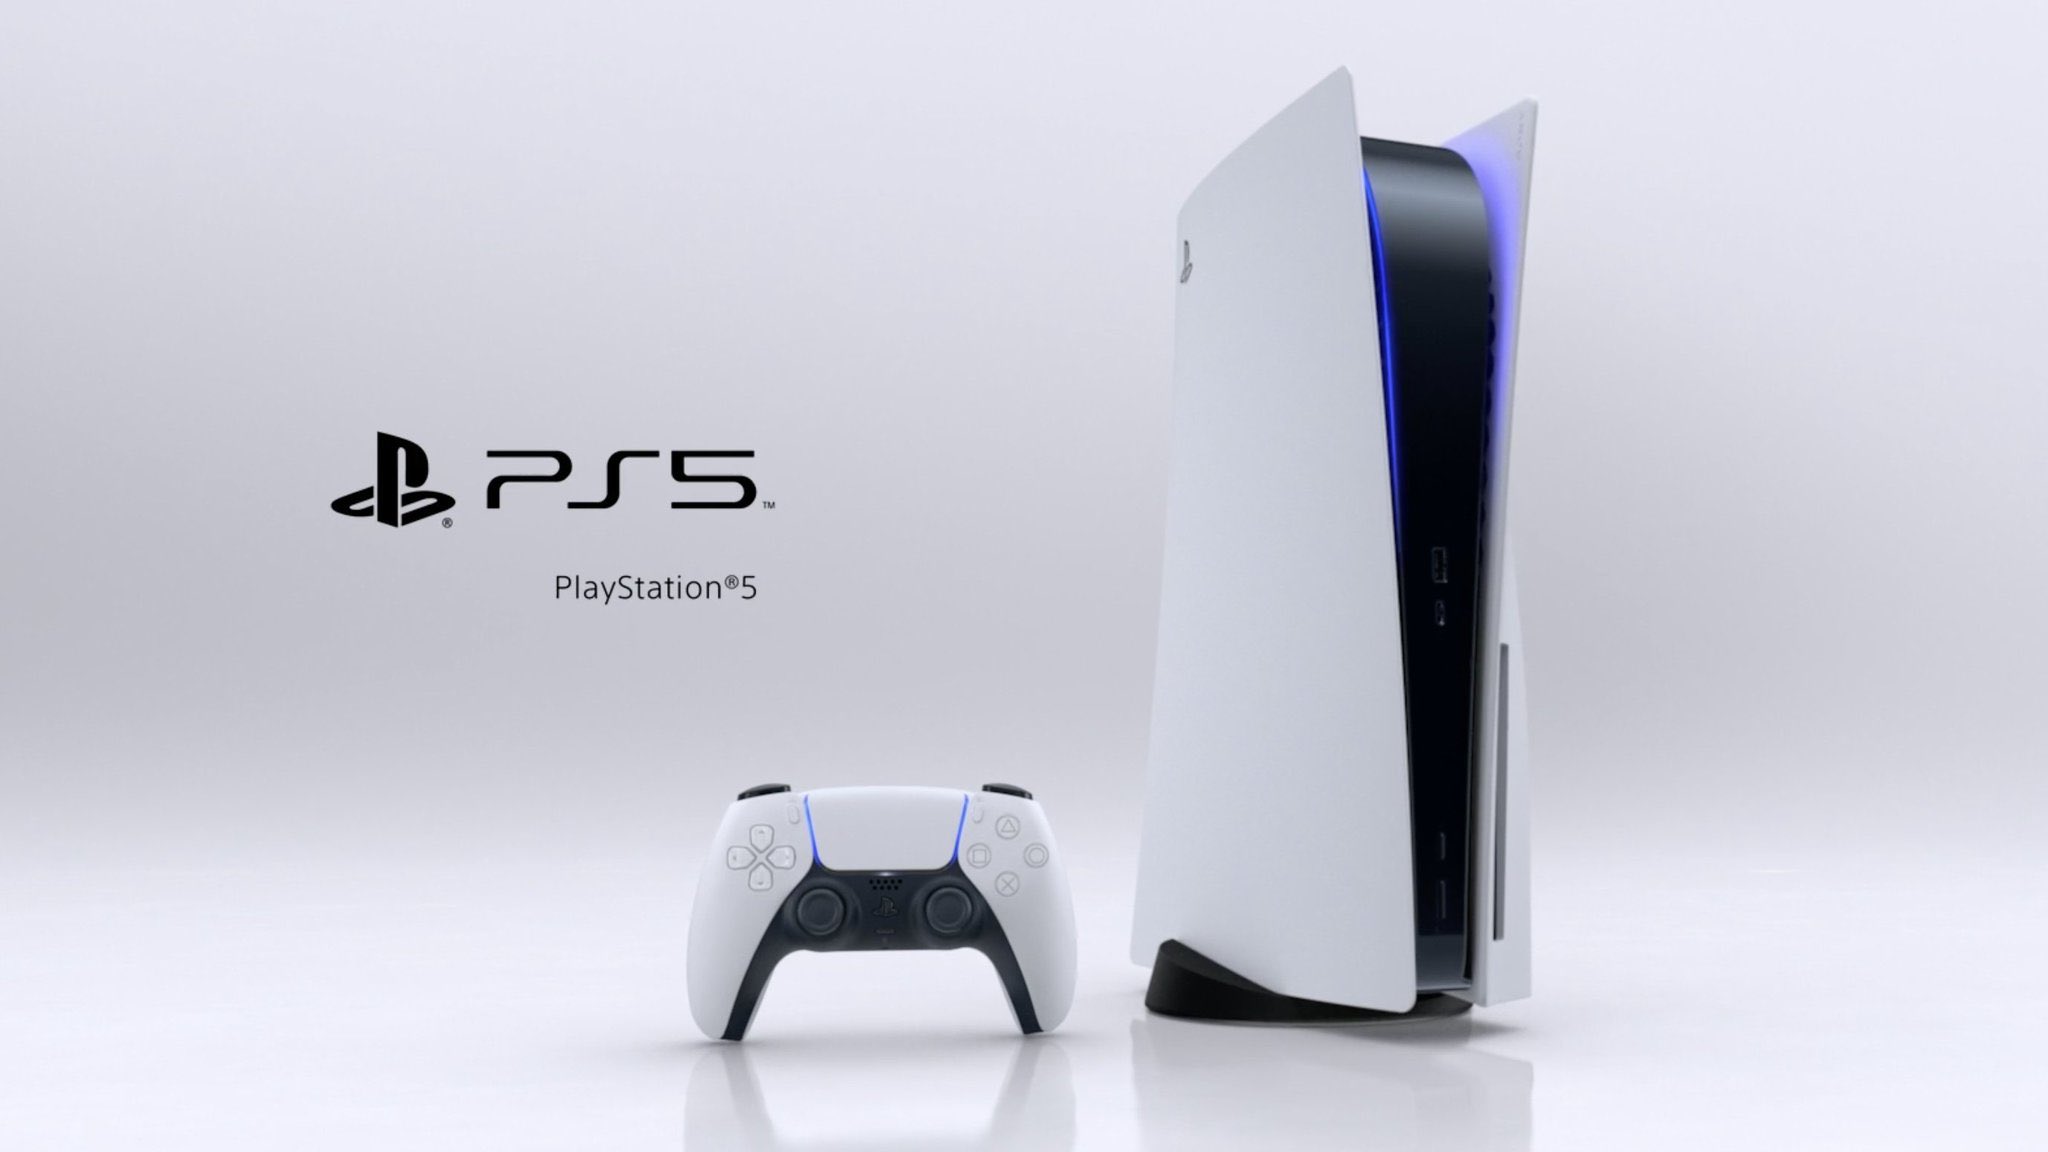 ps5 1 - PS5 Console Design+New Game Trailers Revealed